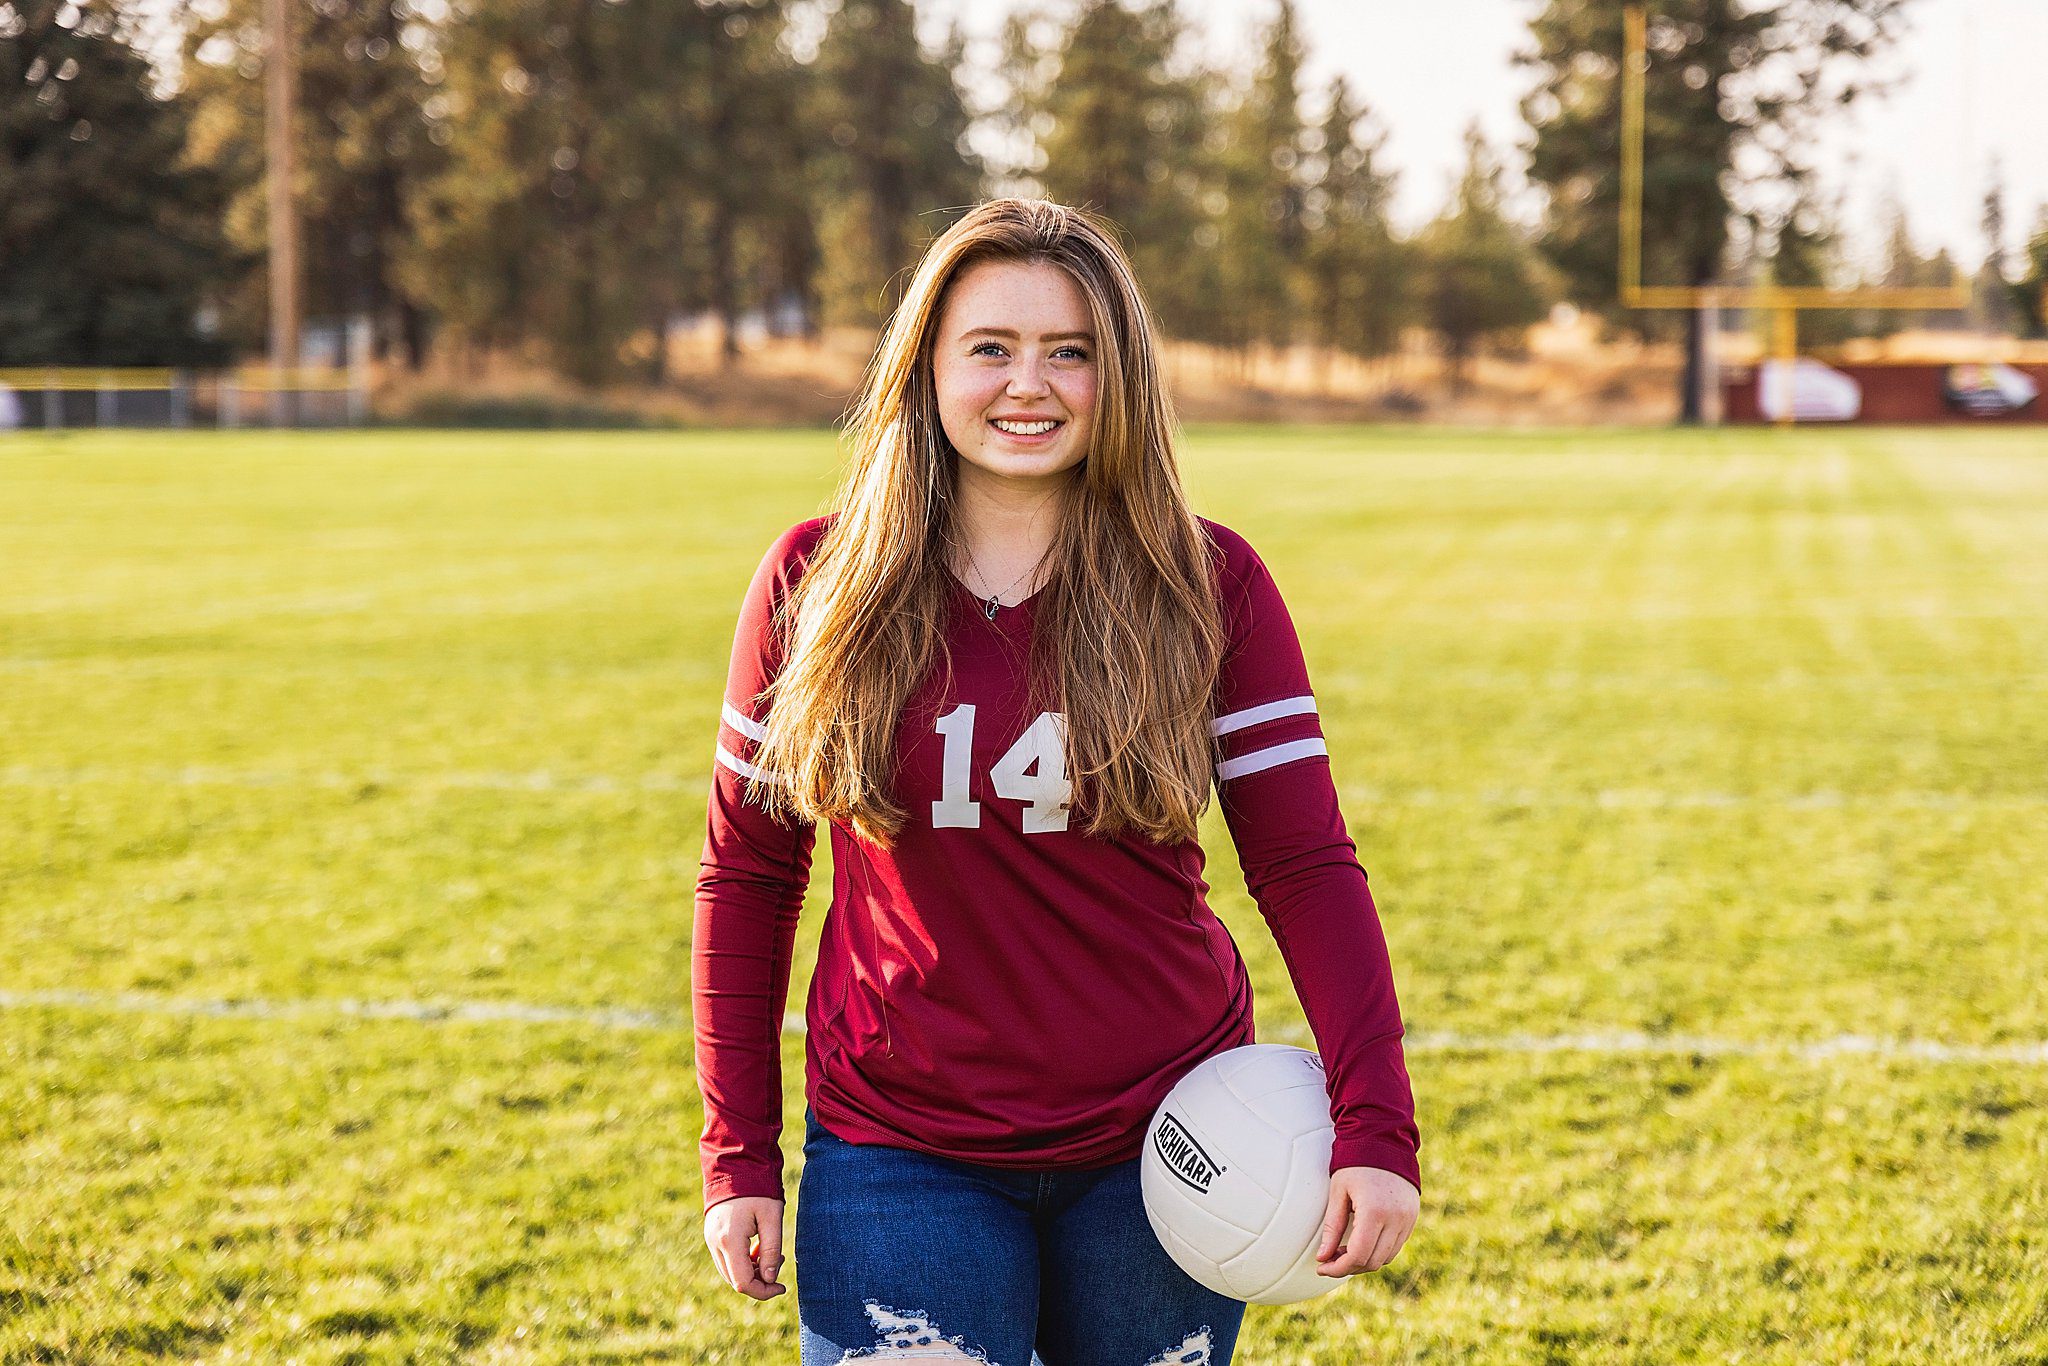 A high school senior stands on a football field wearing a volleyball jersey while holding a volleyball spokane tutors